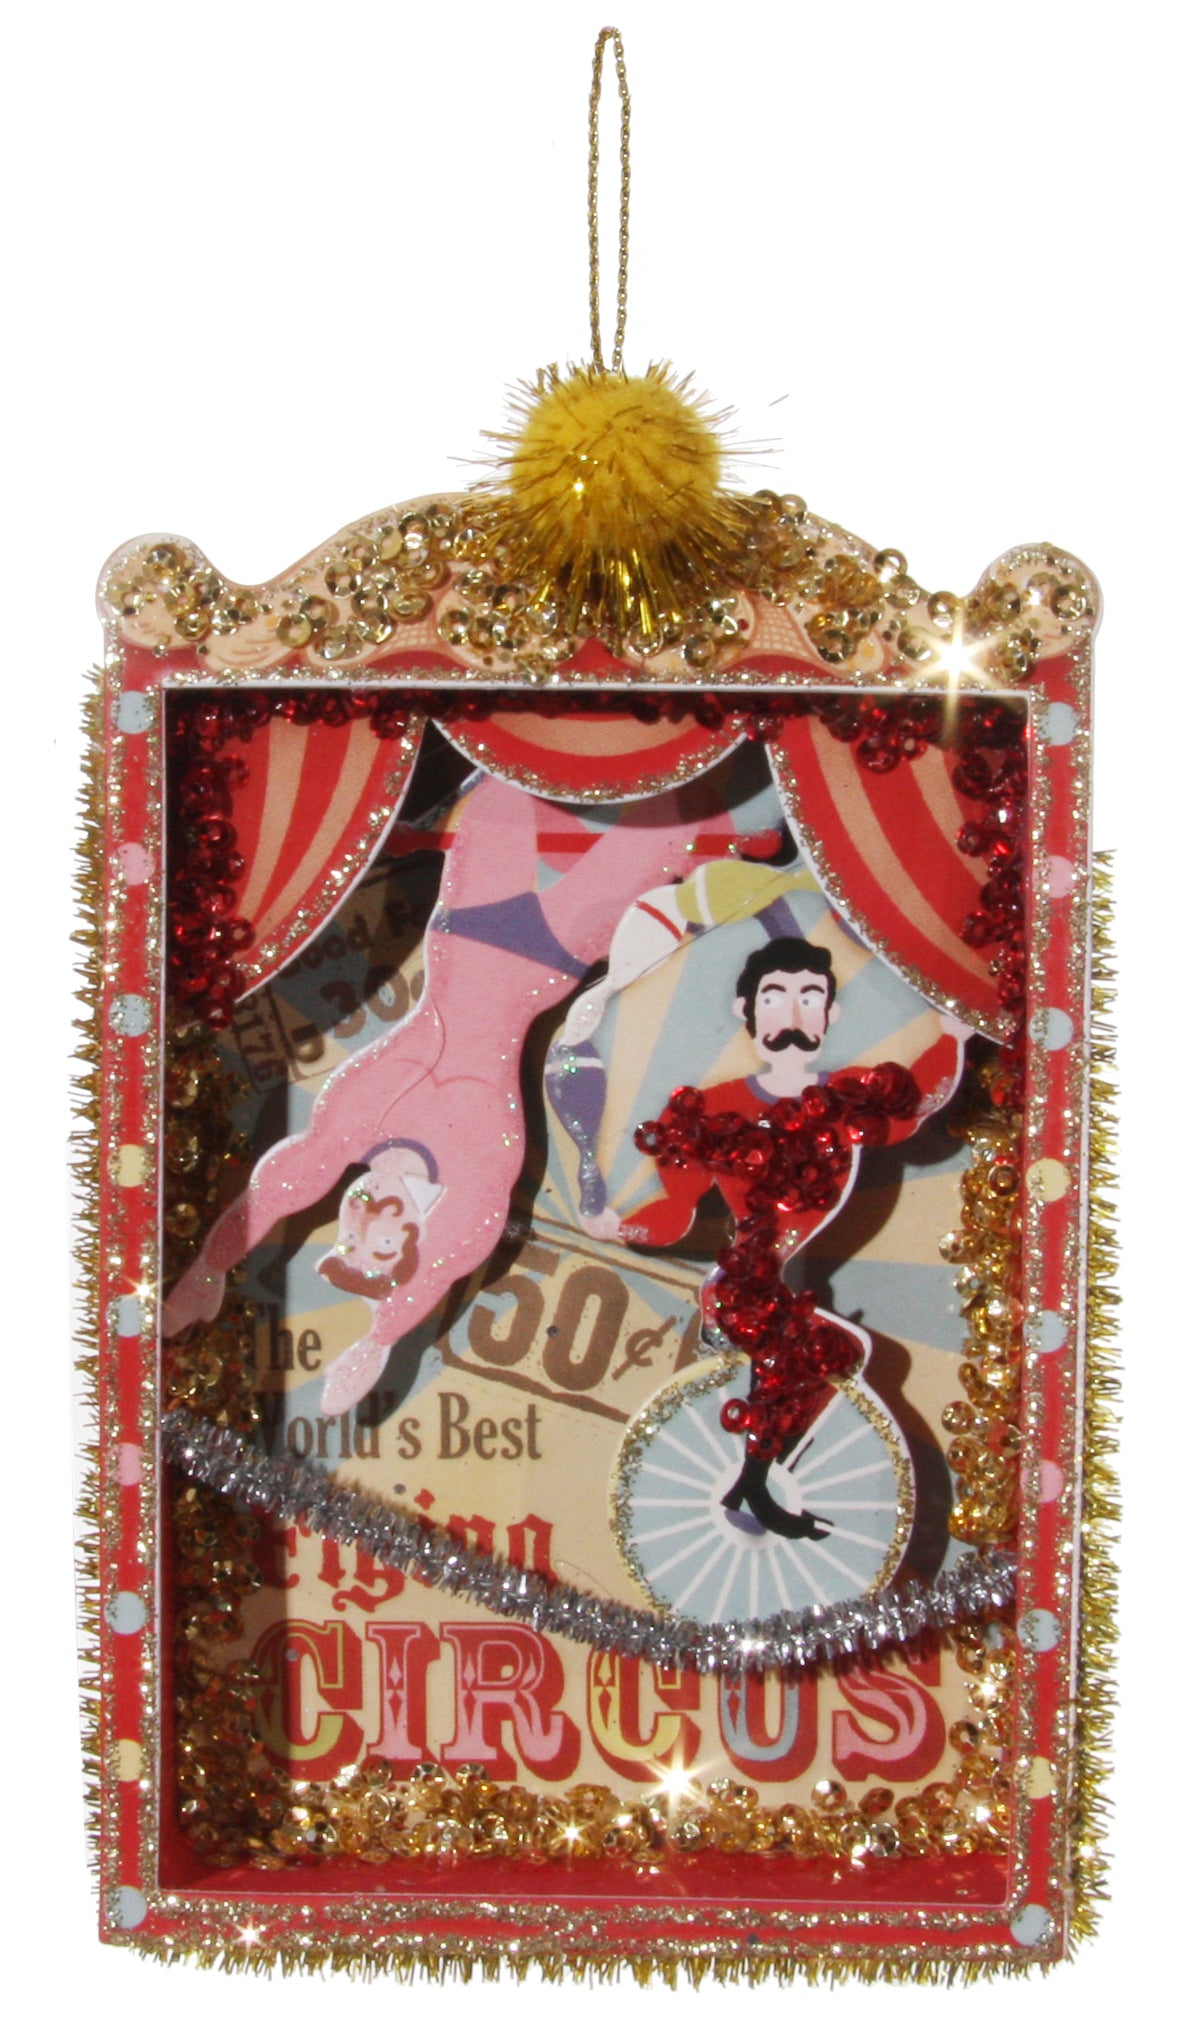 World's Best Circus Shadowbox Ornament with acrobats